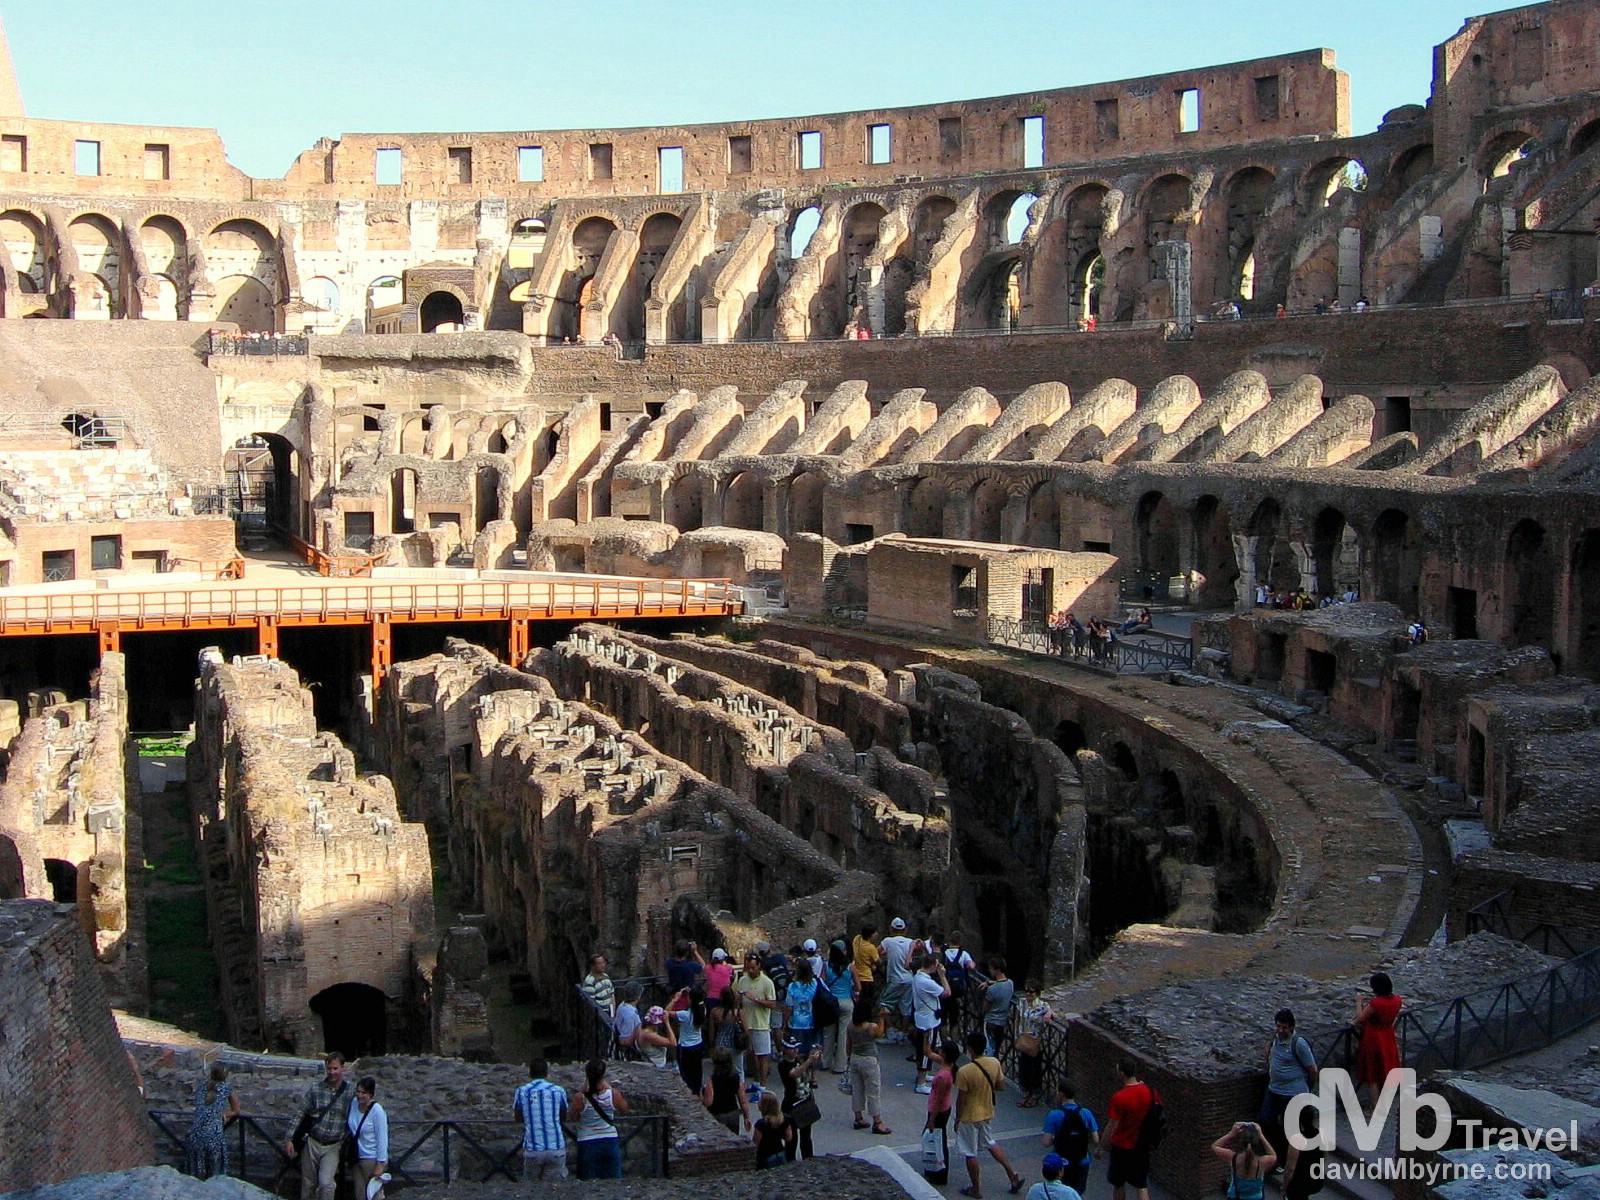 The inside of the Colosseum, Rome, Italy. September 2nd, 2007.